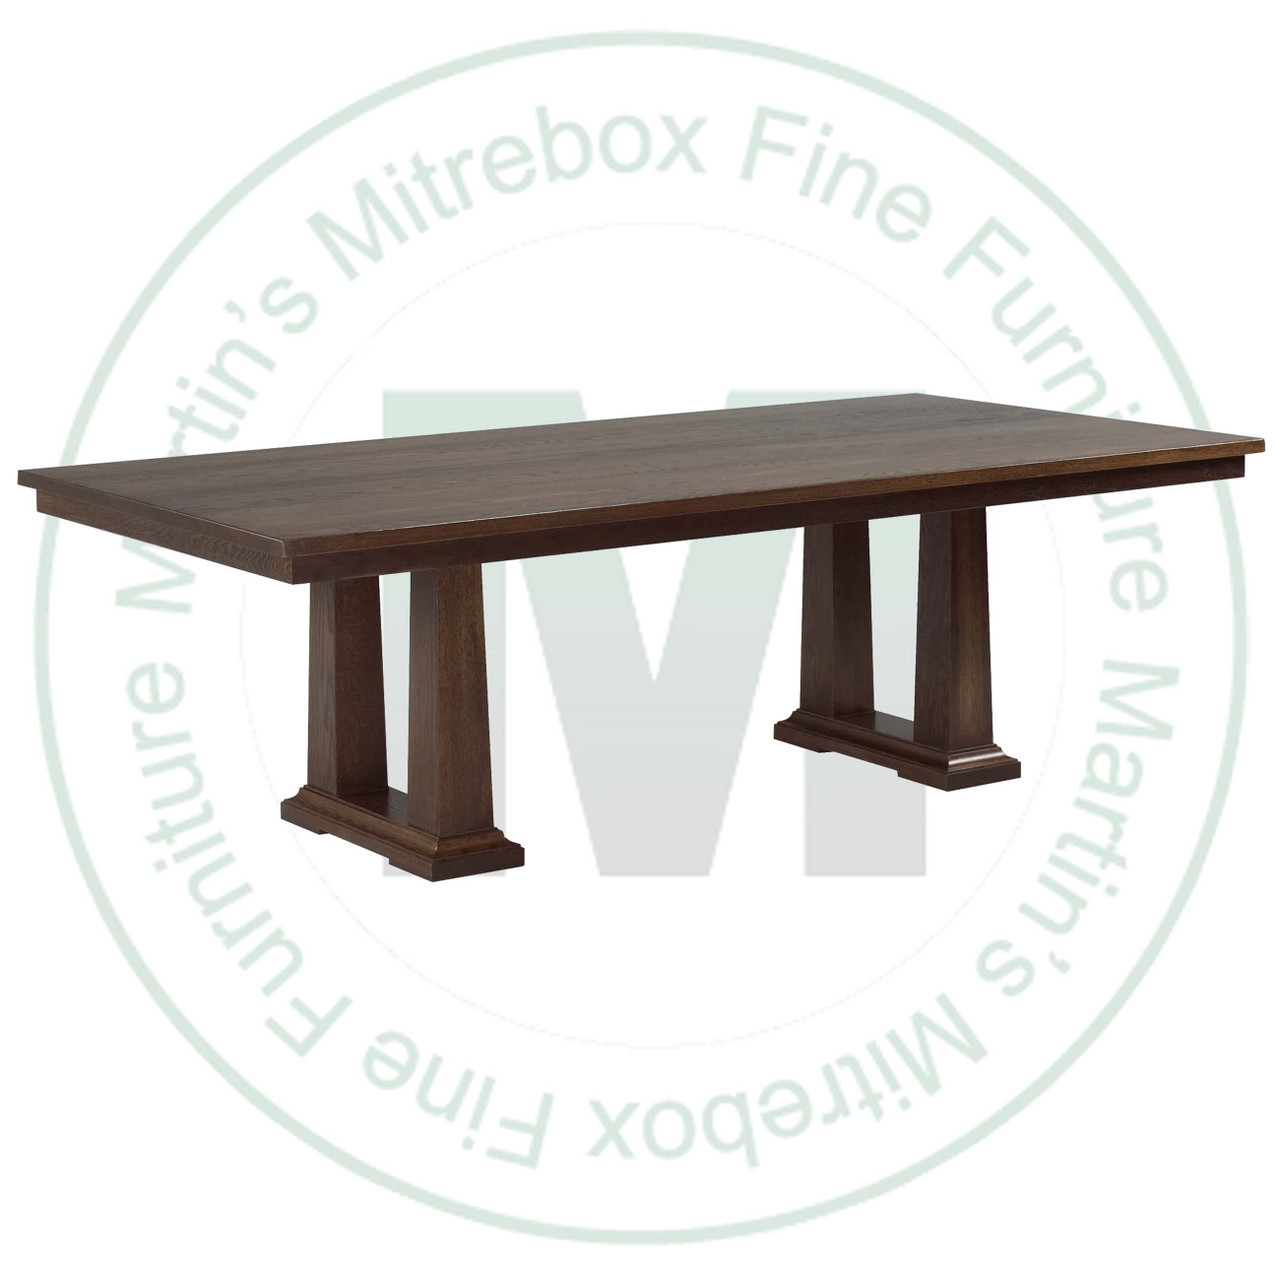 Oak Acropolis Solid Top Double Pedestal Table 54''D x 96''W x 30''H Table Has 1.75'' Thick Top And 2 - 16'' Extensions